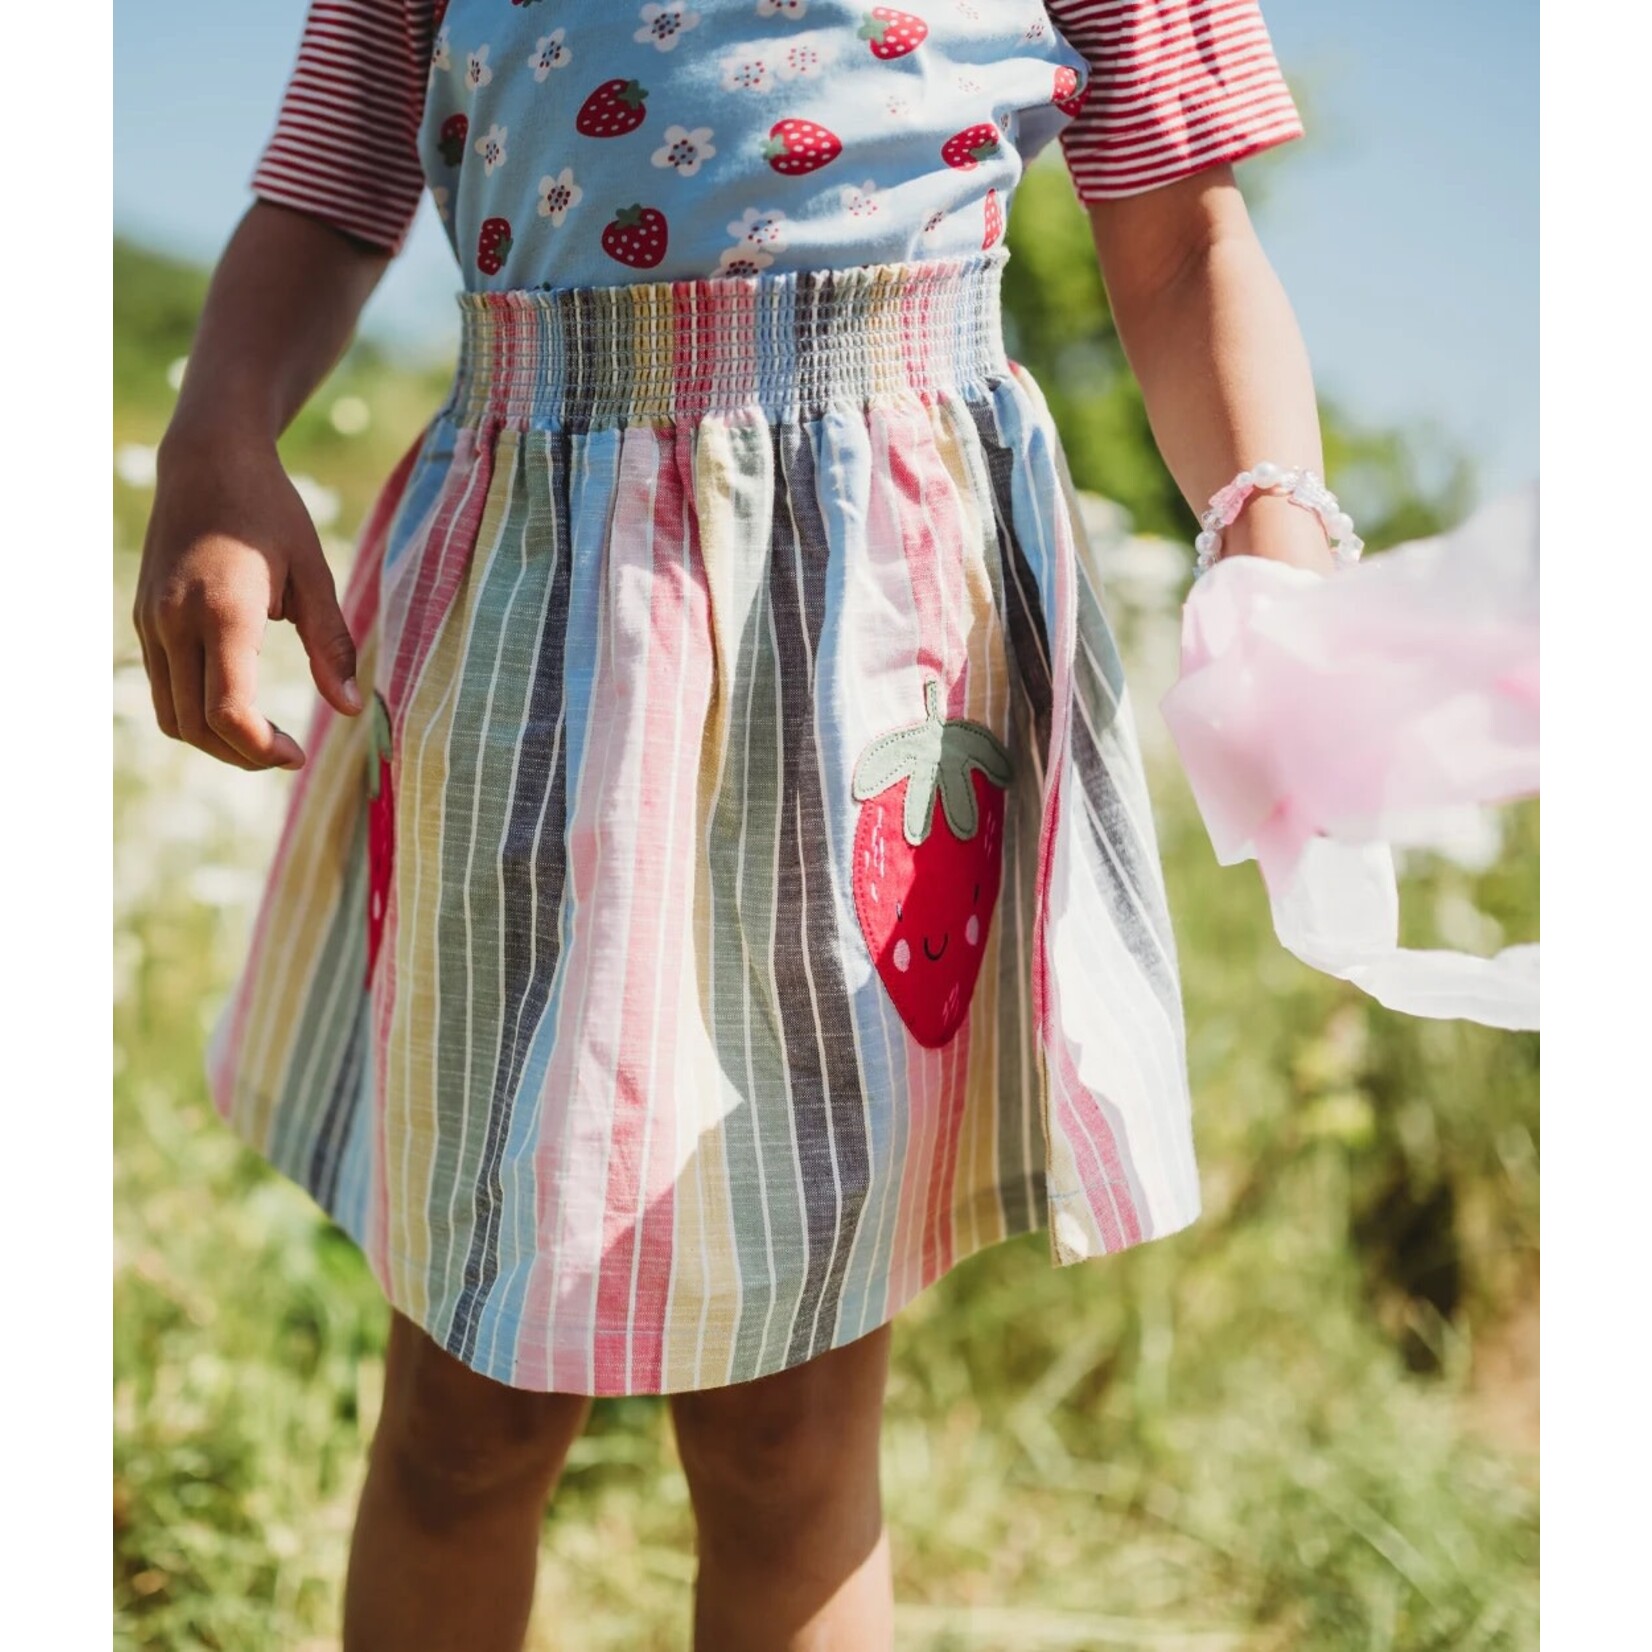 Lilly+Sid LILLY+SID - Rainbow Vertical Striped Skirt with Strawberry Appliqué